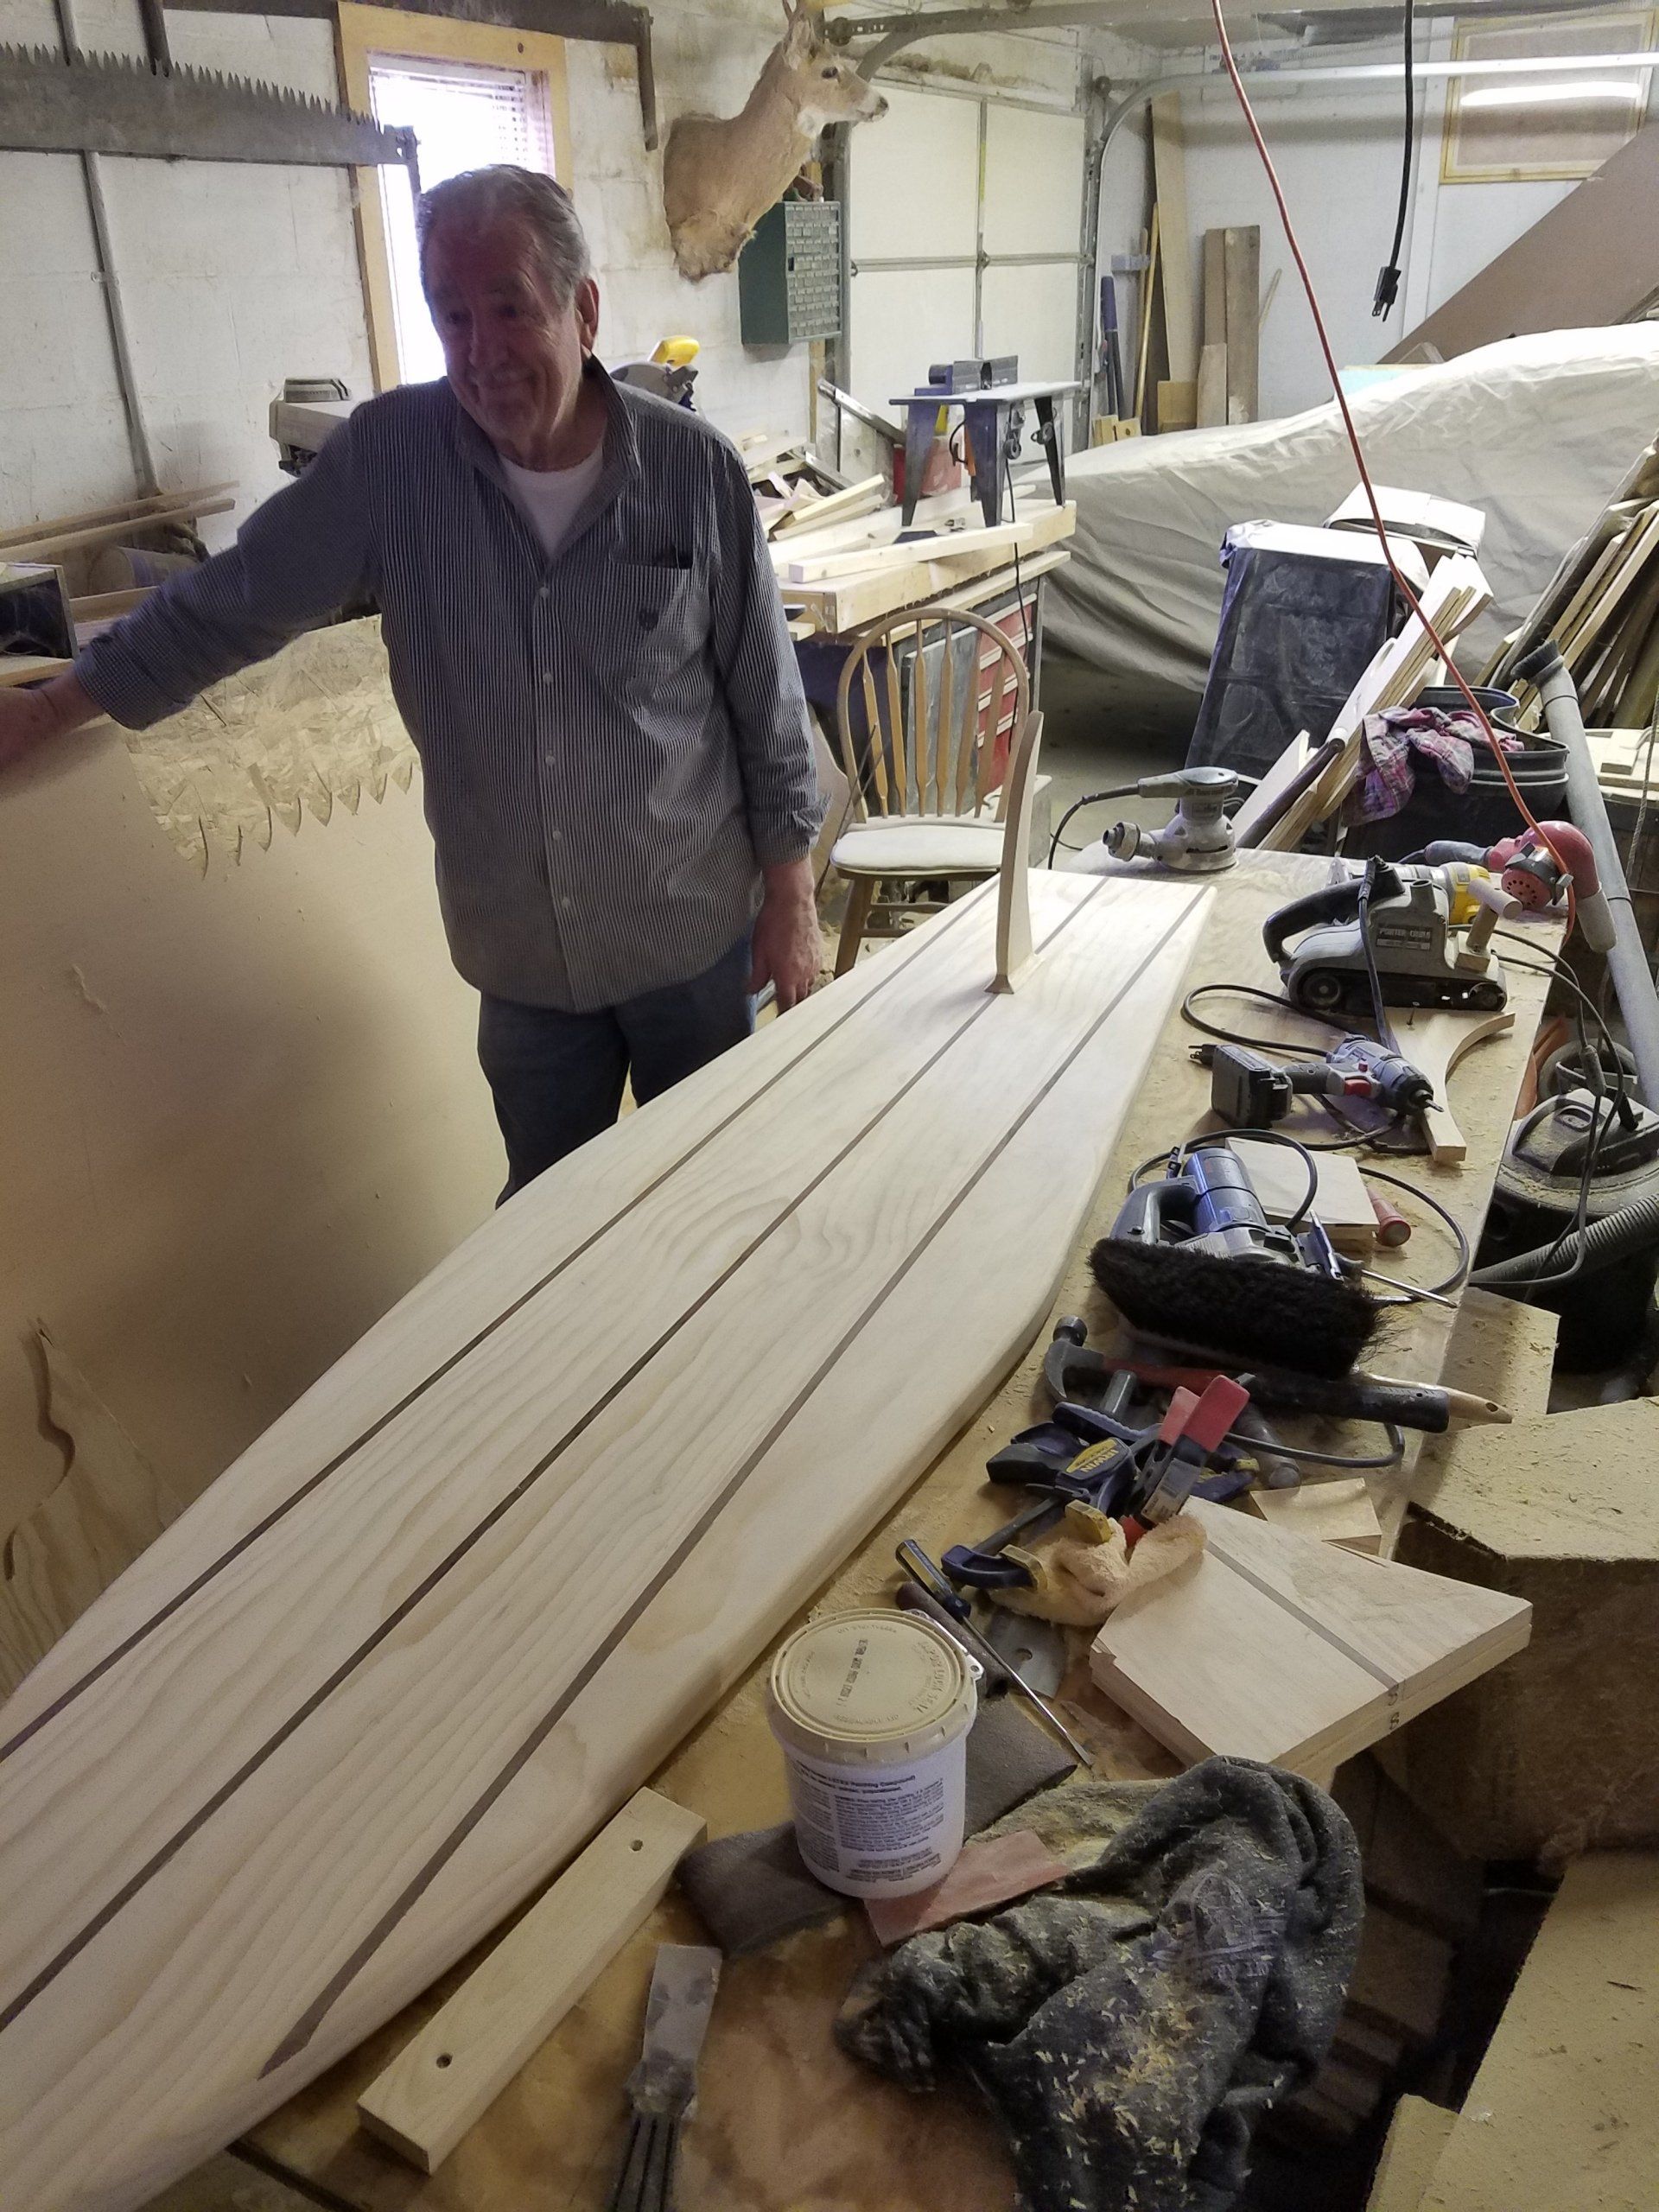 A man standing next to a wooden surfboard in a workshop